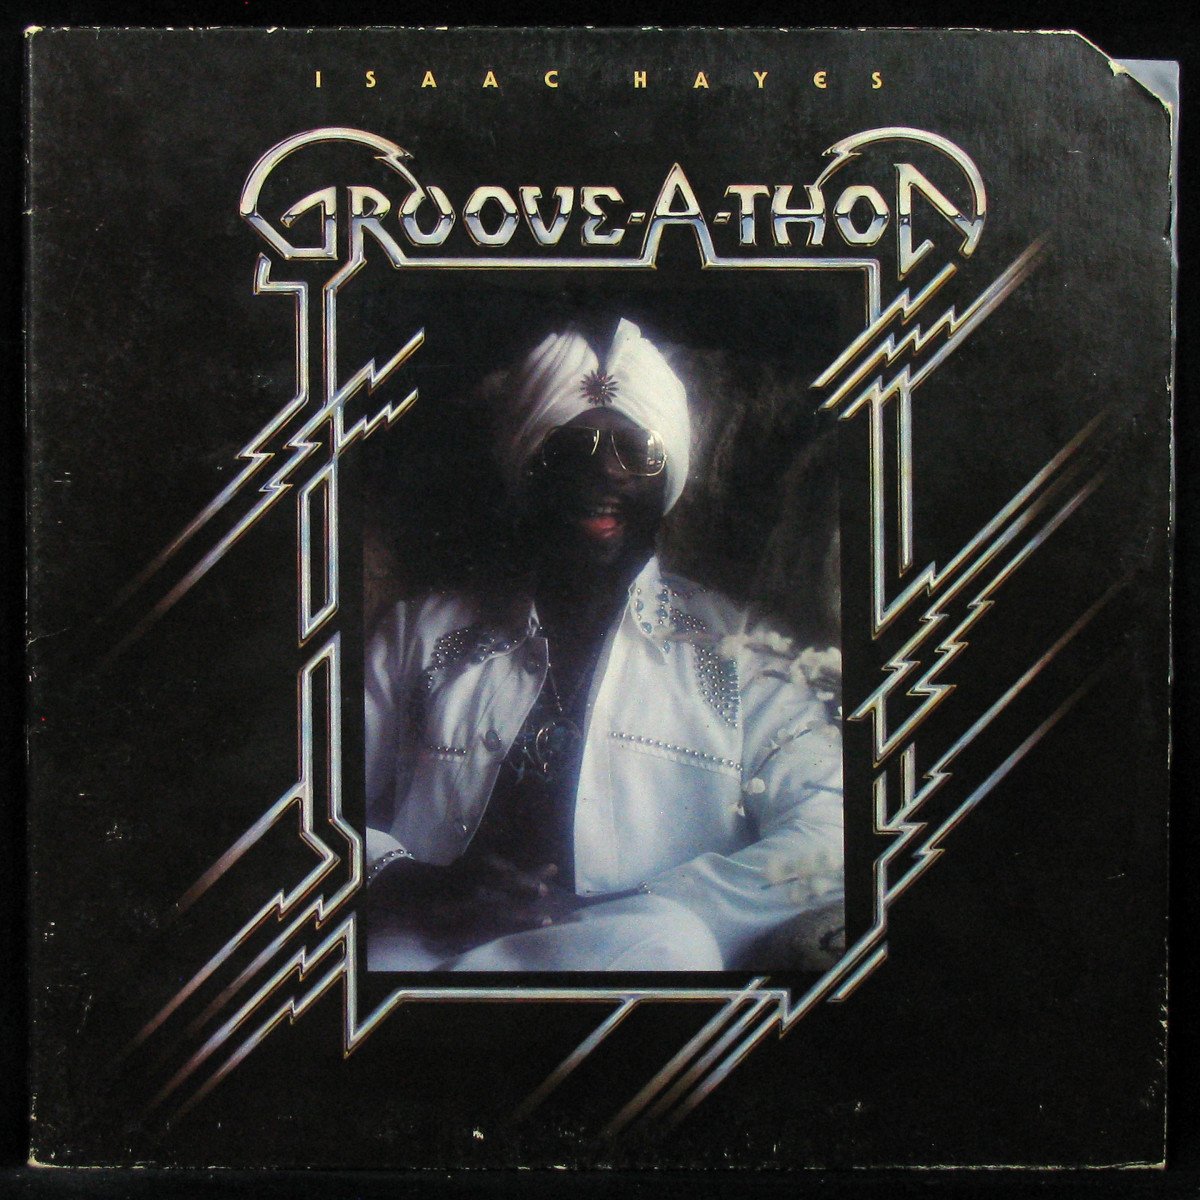 Groove - A - Thon